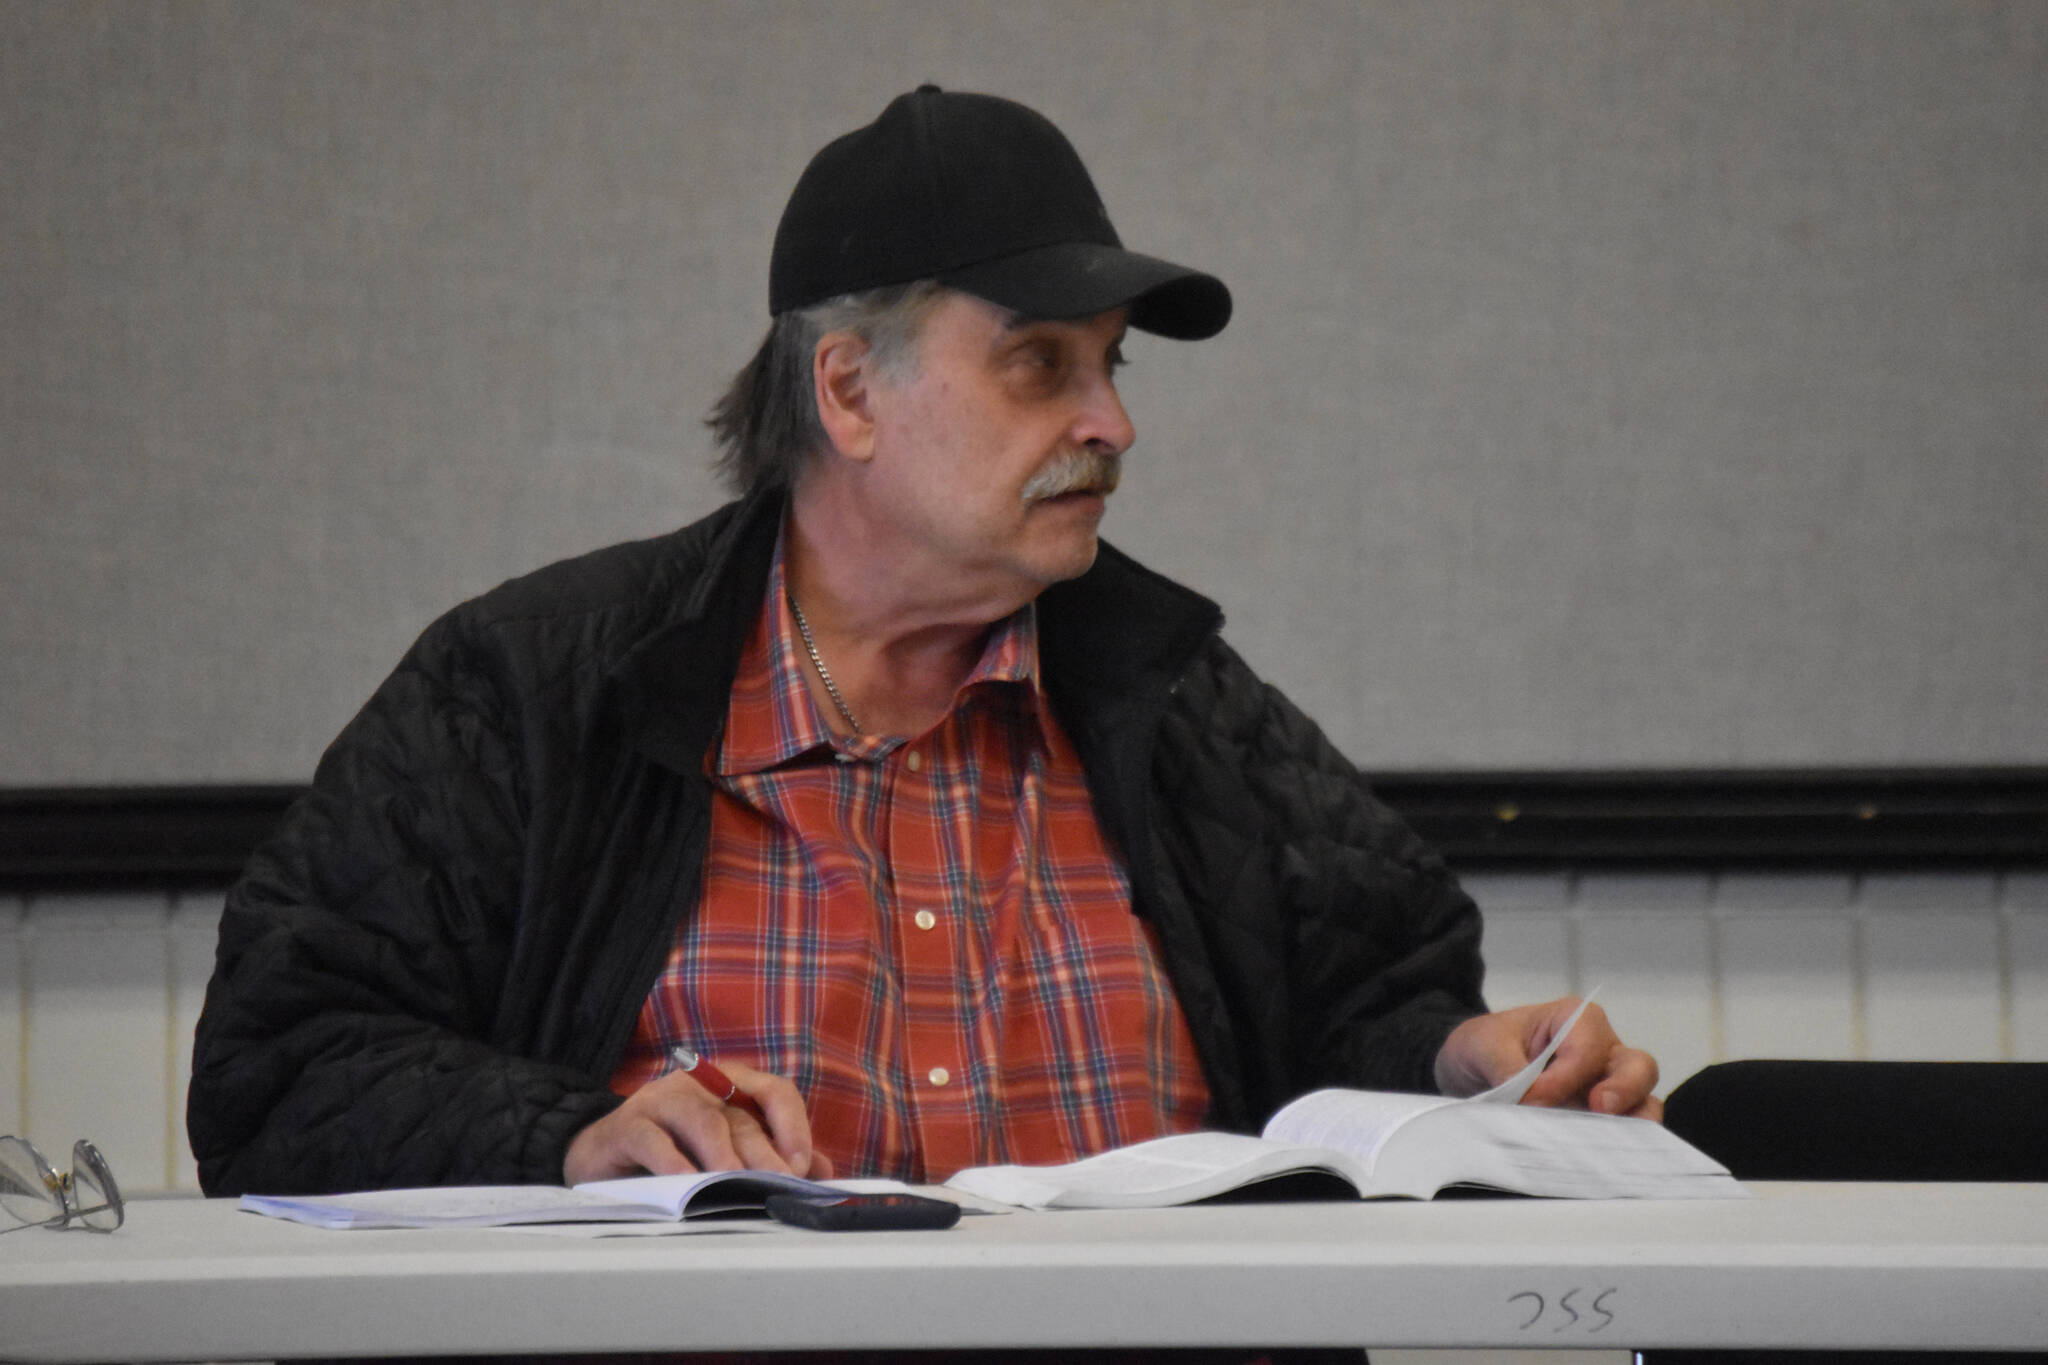 Vice Chair Paul Shadura speaks during a meeting of the Kenai/Soldotna Fish and Game Advisory Committee on Tuesday, April 4, 2023, at the Soldotna Regional Sports Complex in Soldotna, Alaska. (Jake Dye/Peninsula Clarion)